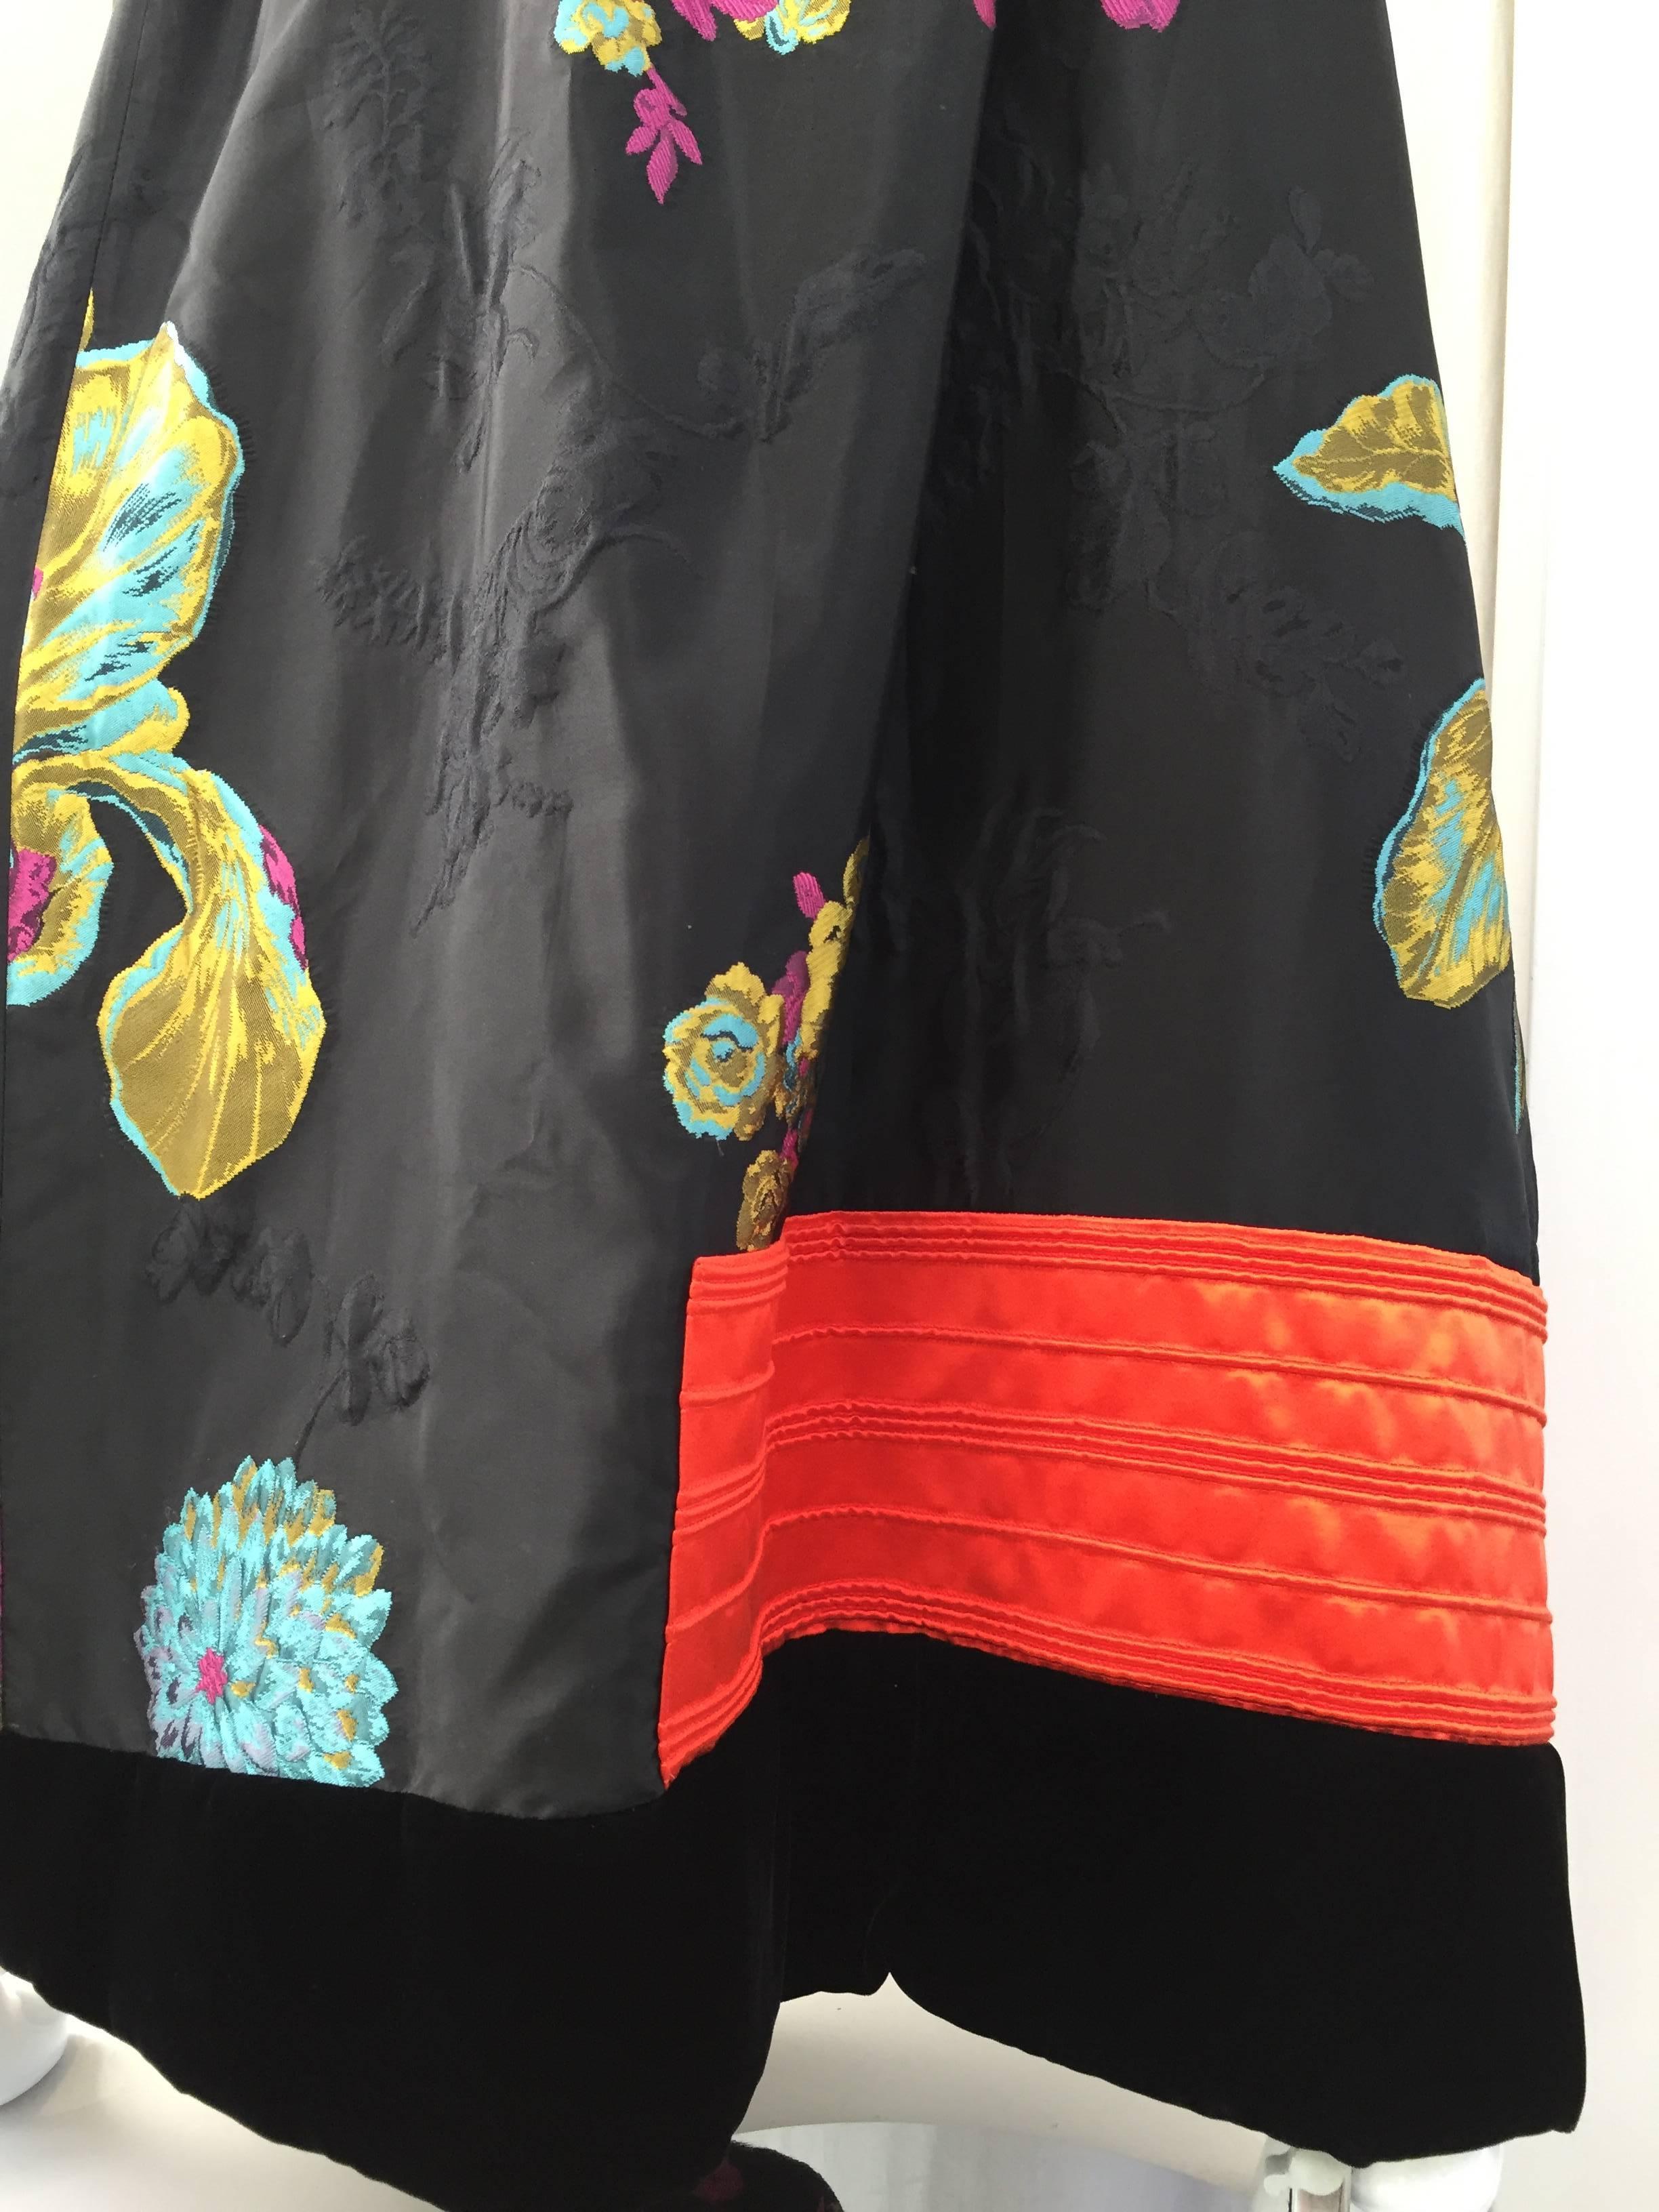 Christian Lacroix Black and Multi Color Floral Silk Brocade Top and Skirt, 1980s 5